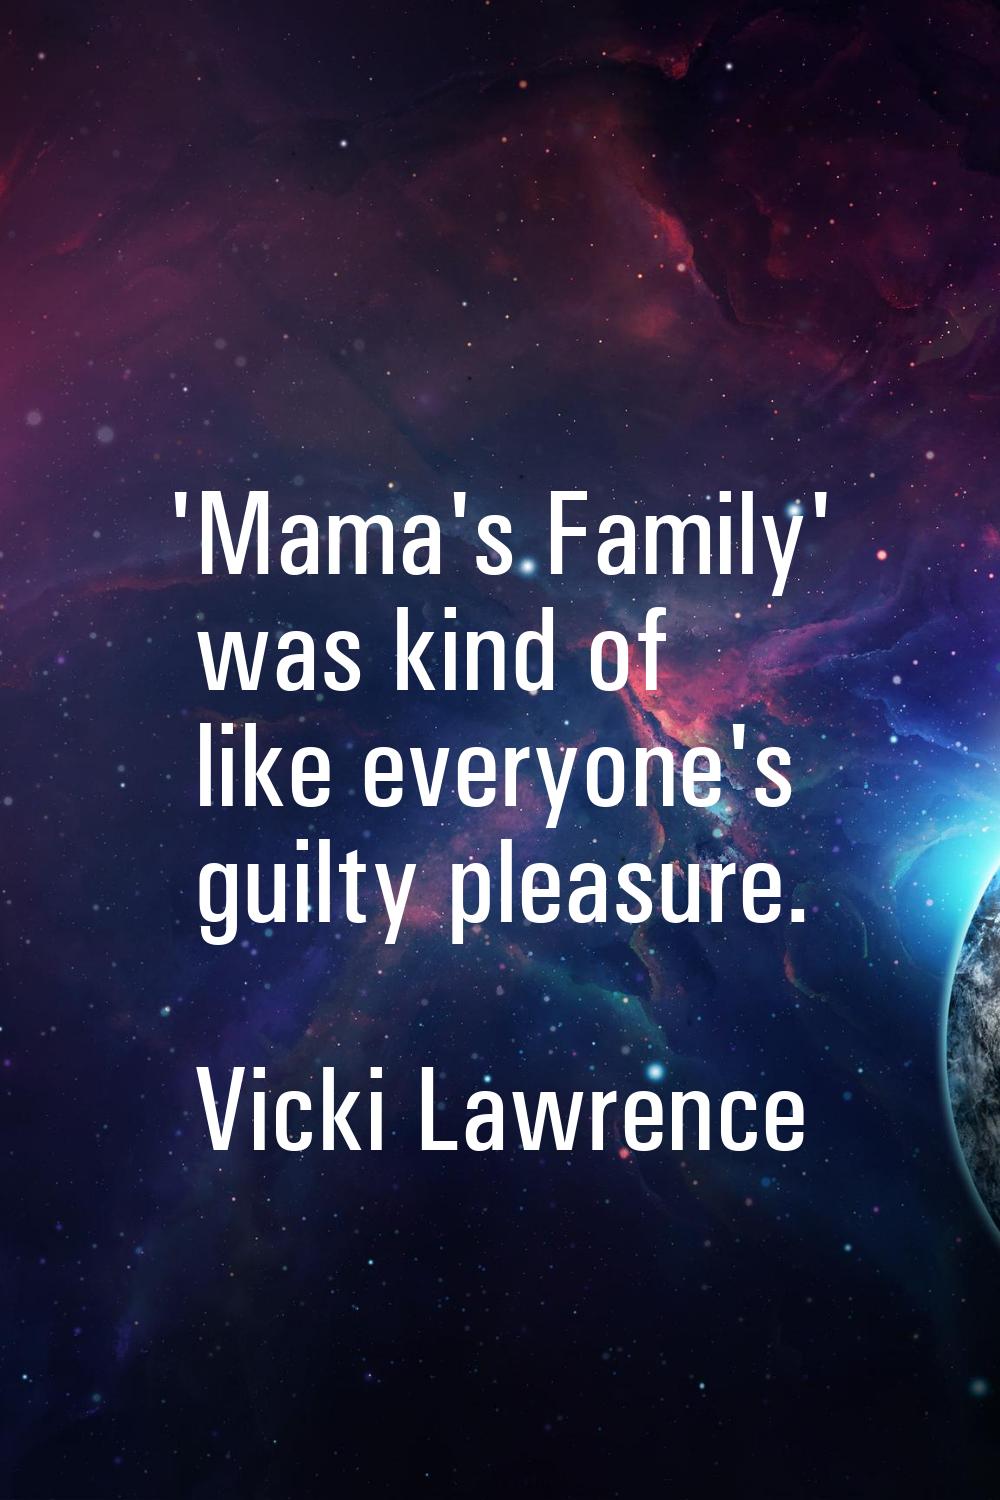 'Mama's Family' was kind of like everyone's guilty pleasure.